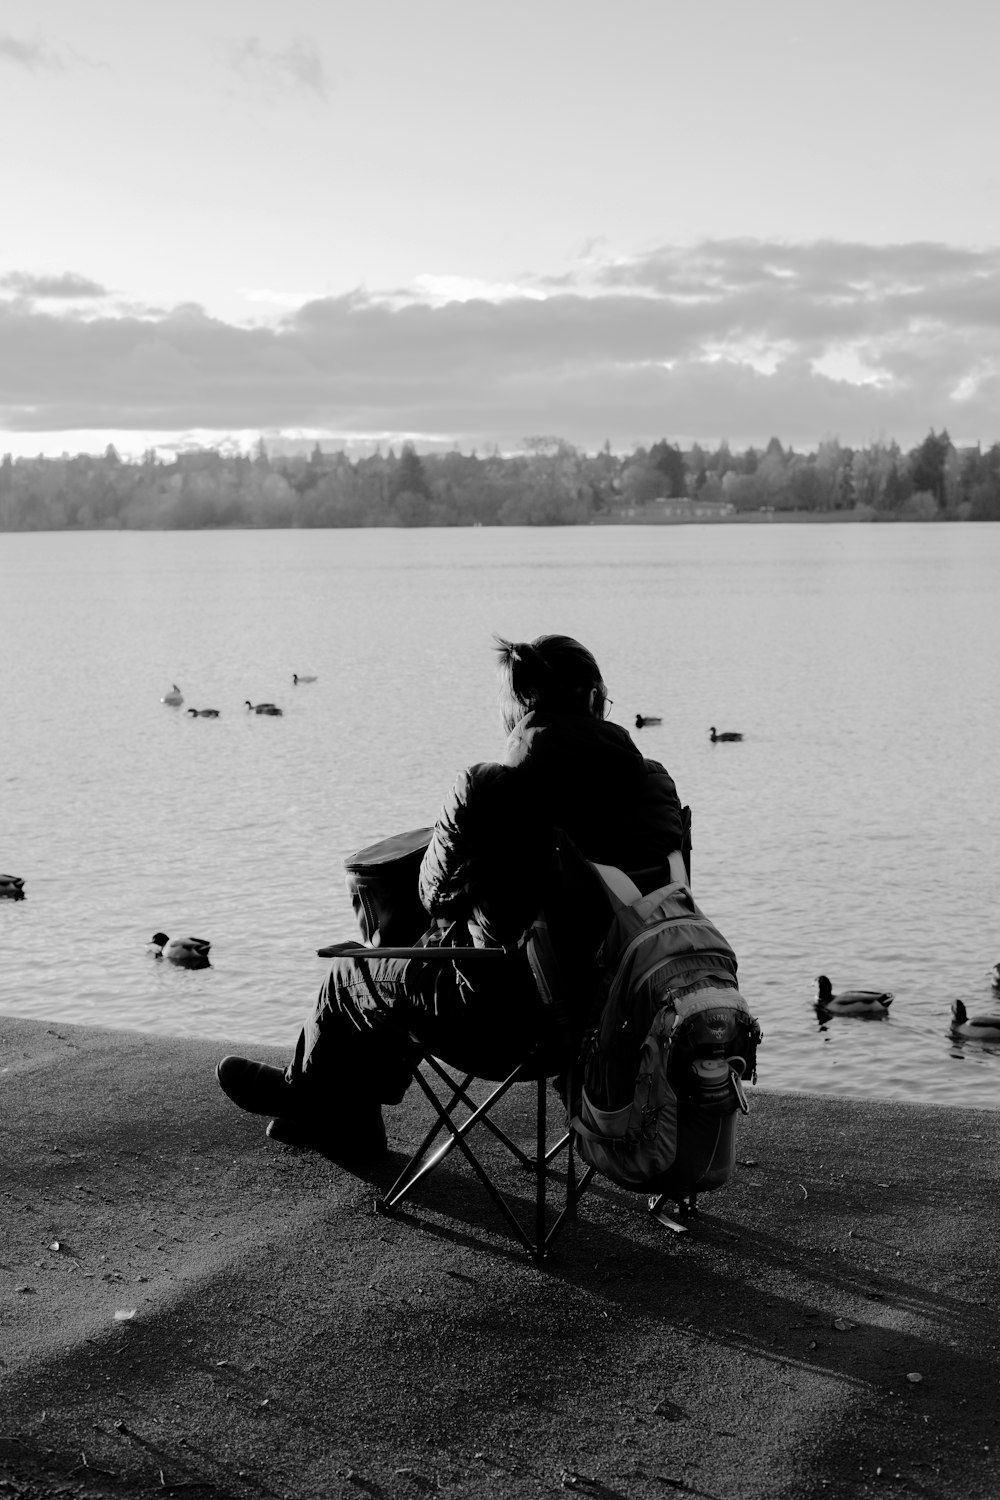 a person sitting on a chair looking at a body of water